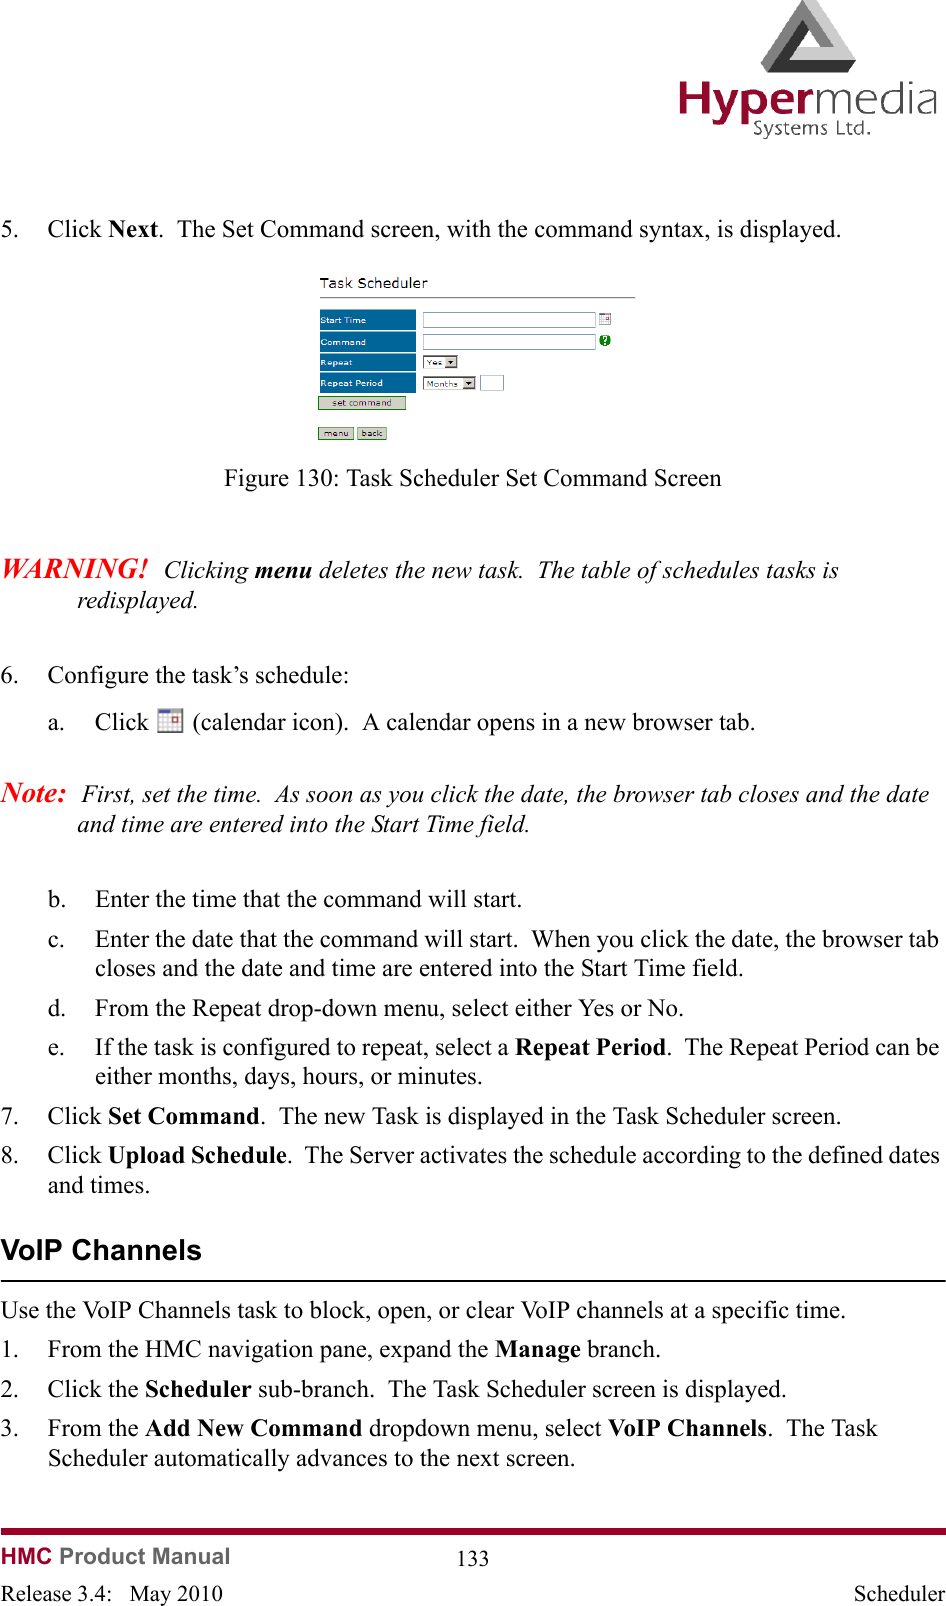 HMC Product Manual  133Release 3.4:   May 2010 Scheduler5. Click Next.  The Set Command screen, with the command syntax, is displayed.              Figure 130: Task Scheduler Set Command ScreenWARNING!  Clicking menu deletes the new task.  The table of schedules tasks is redisplayed.6. Configure the task’s schedule:a. Click   (calendar icon).  A calendar opens in a new browser tab.Note:  First, set the time.  As soon as you click the date, the browser tab closes and the date and time are entered into the Start Time field.b. Enter the time that the command will start.c. Enter the date that the command will start.  When you click the date, the browser tab closes and the date and time are entered into the Start Time field.d. From the Repeat drop-down menu, select either Yes or No.e. If the task is configured to repeat, select a Repeat Period.  The Repeat Period can be either months, days, hours, or minutes.7. Click Set Command.  The new Task is displayed in the Task Scheduler screen.8. Click Upload Schedule.  The Server activates the schedule according to the defined dates and times.VoIP ChannelsUse the VoIP Channels task to block, open, or clear VoIP channels at a specific time. 1. From the HMC navigation pane, expand the Manage branch.2. Click the Scheduler sub-branch.  The Task Scheduler screen is displayed.3. From the Add New Command dropdown menu, select VoIP Channels.  The Task Scheduler automatically advances to the next screen.